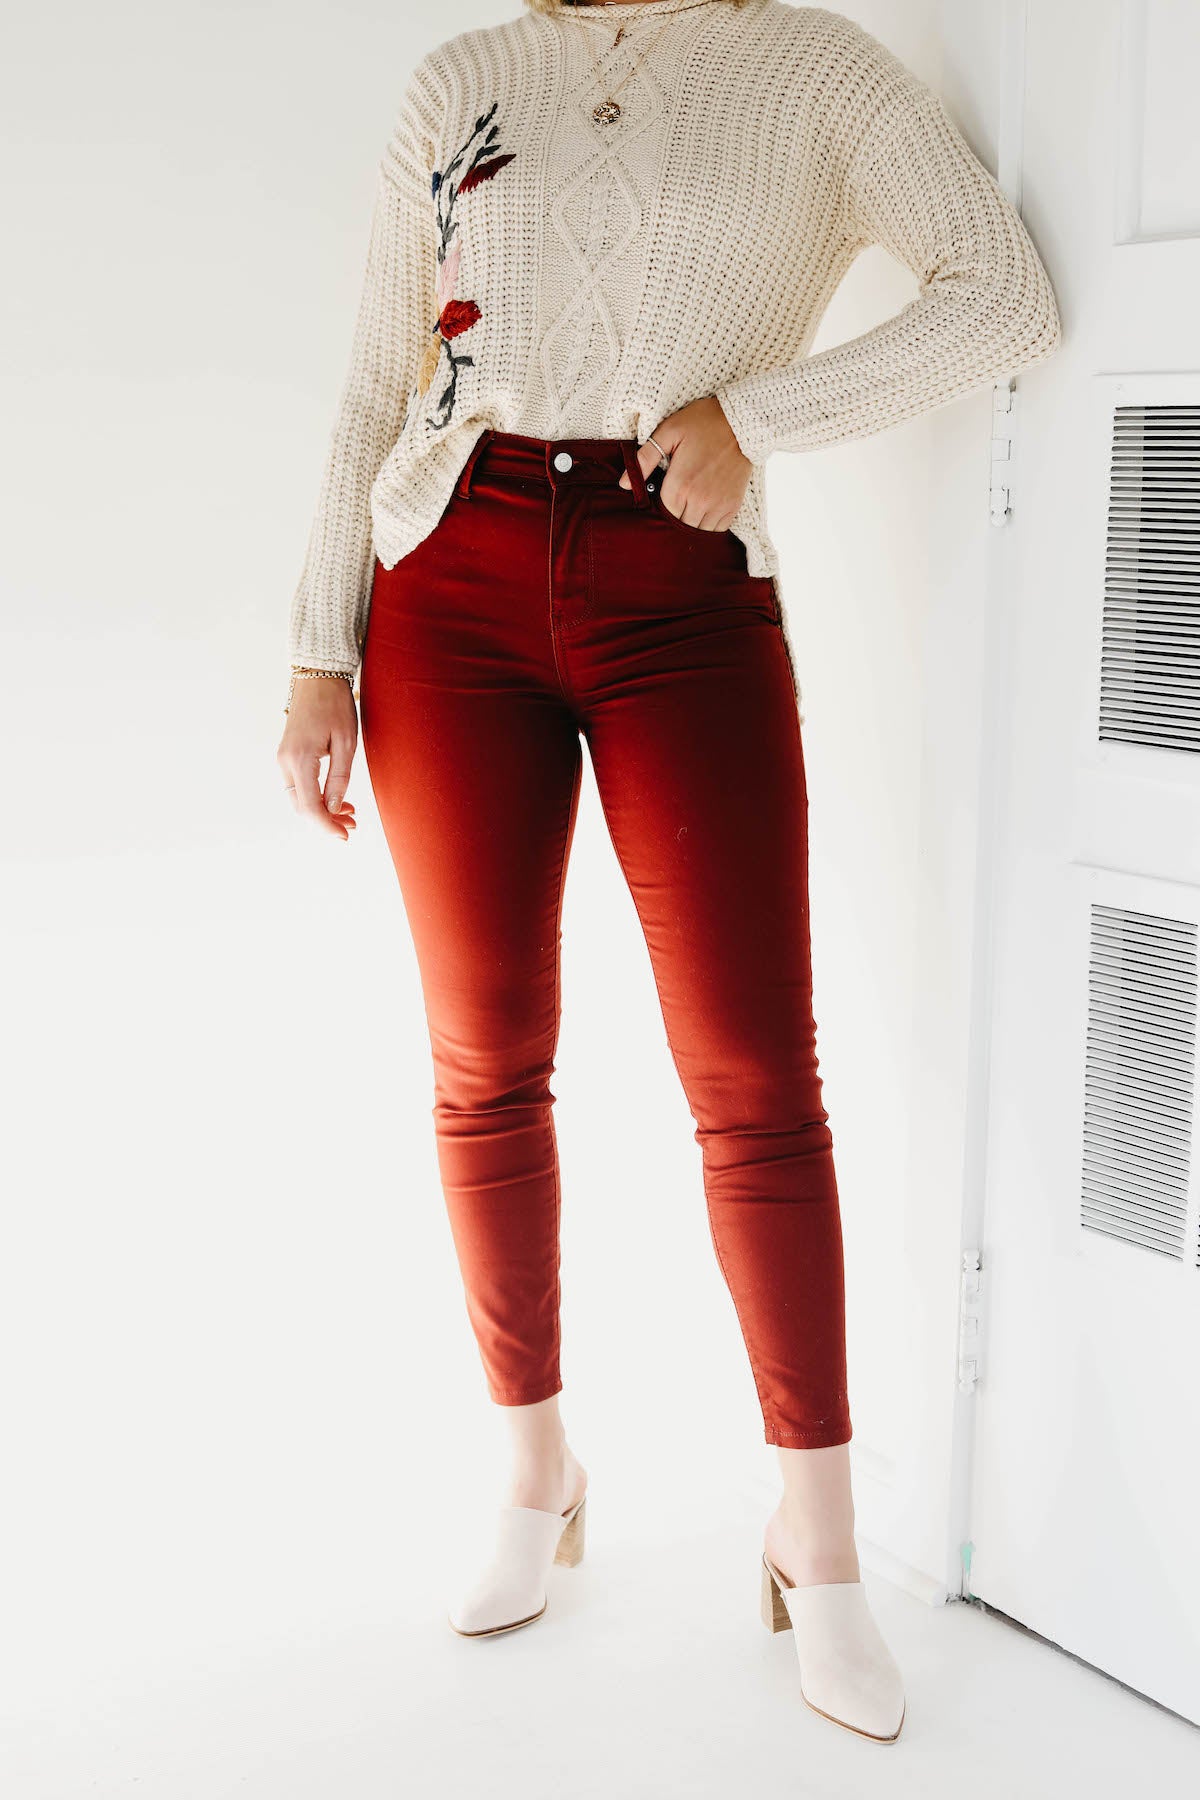 The India High Rise Skinny Jeans